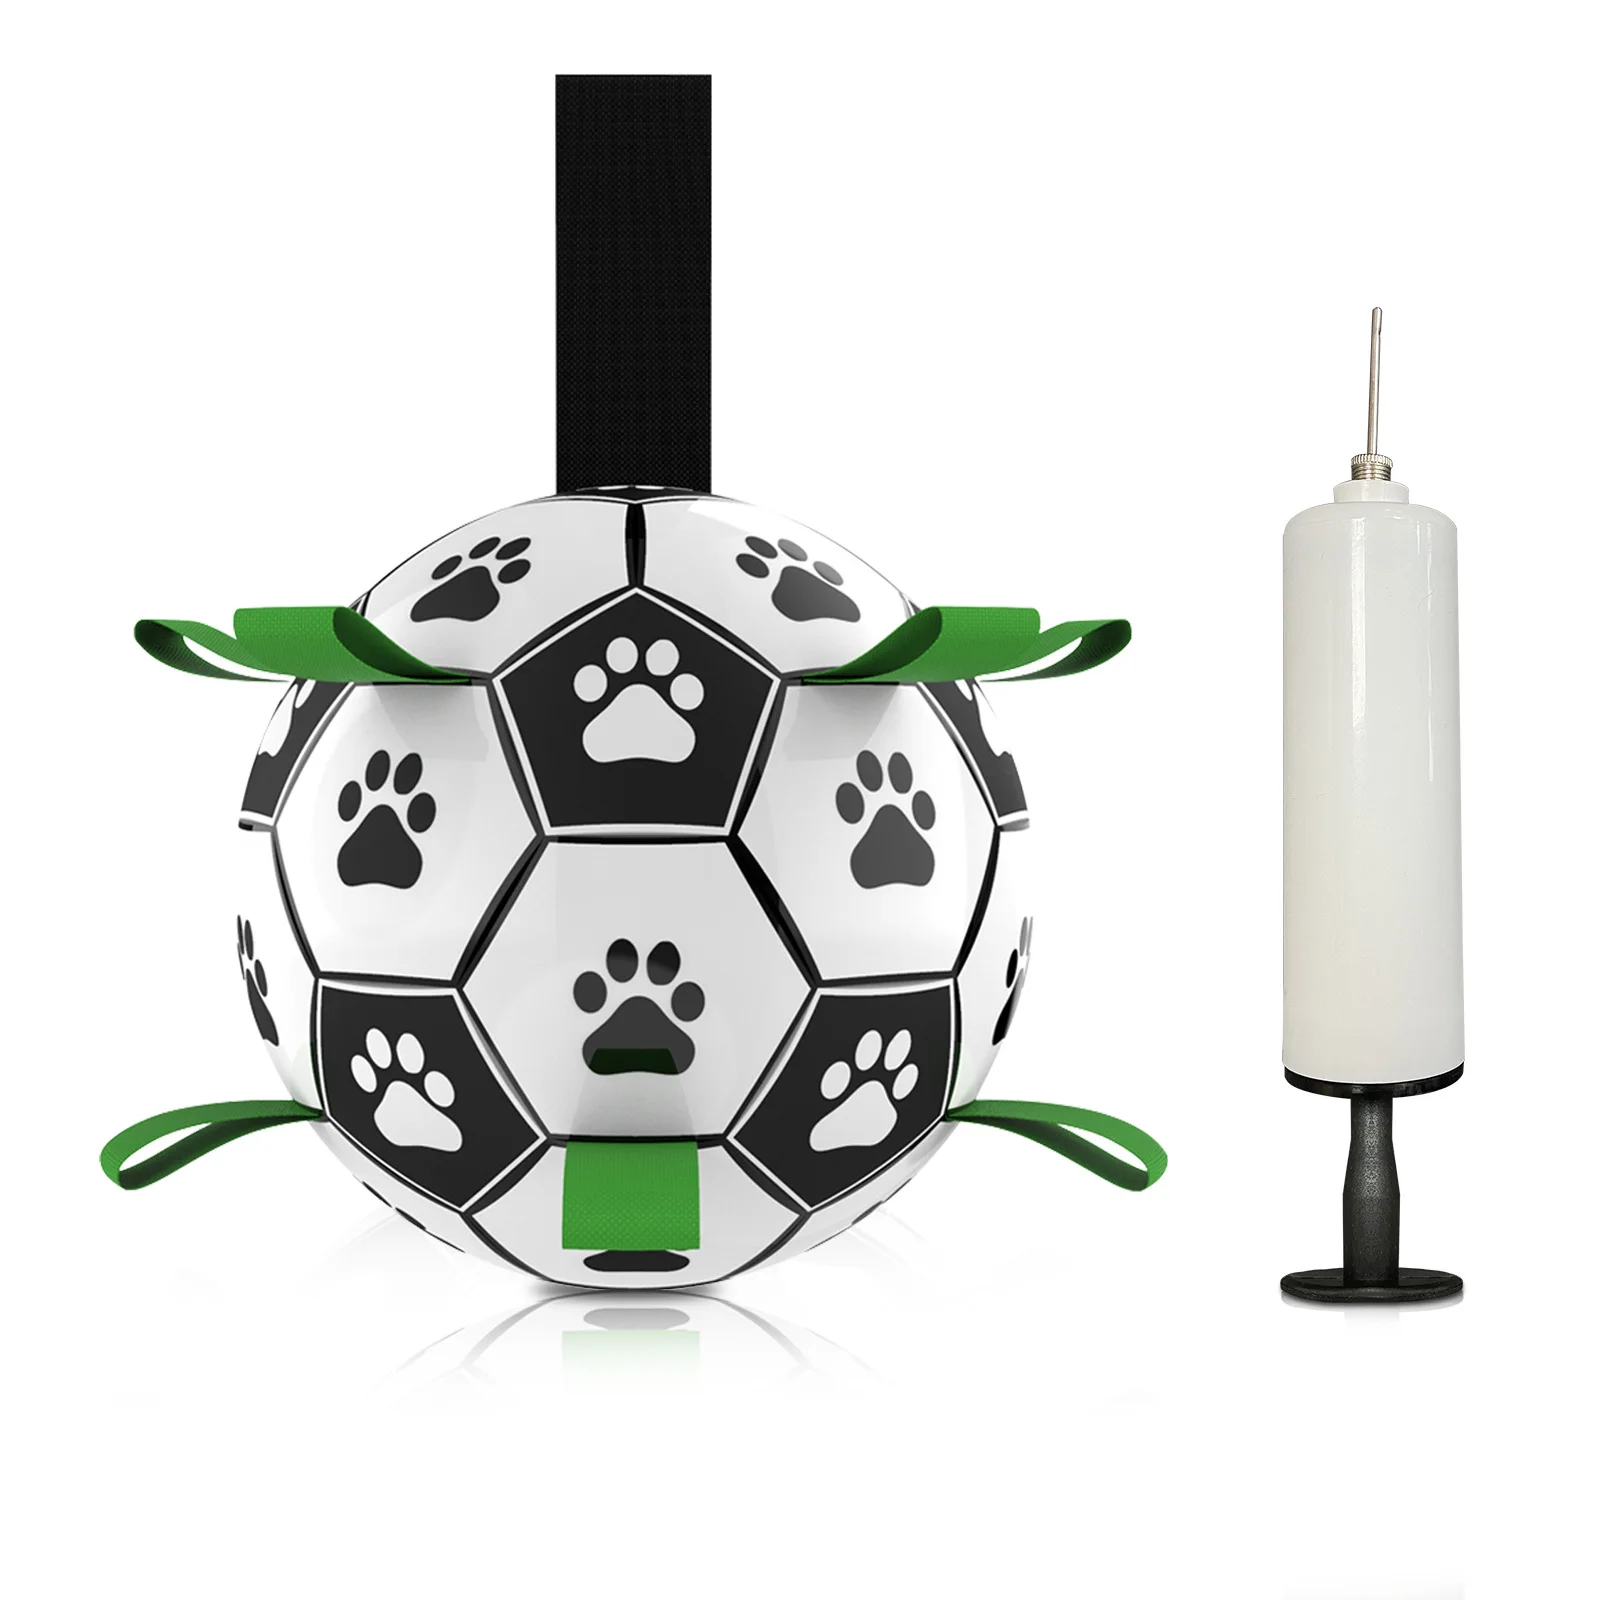 

2021 New Design Amazon Hot Selling Pet Supplies Dog Interactive Toy Outdoor Multifunctional Pet Football Type Toy, As shown in pictures